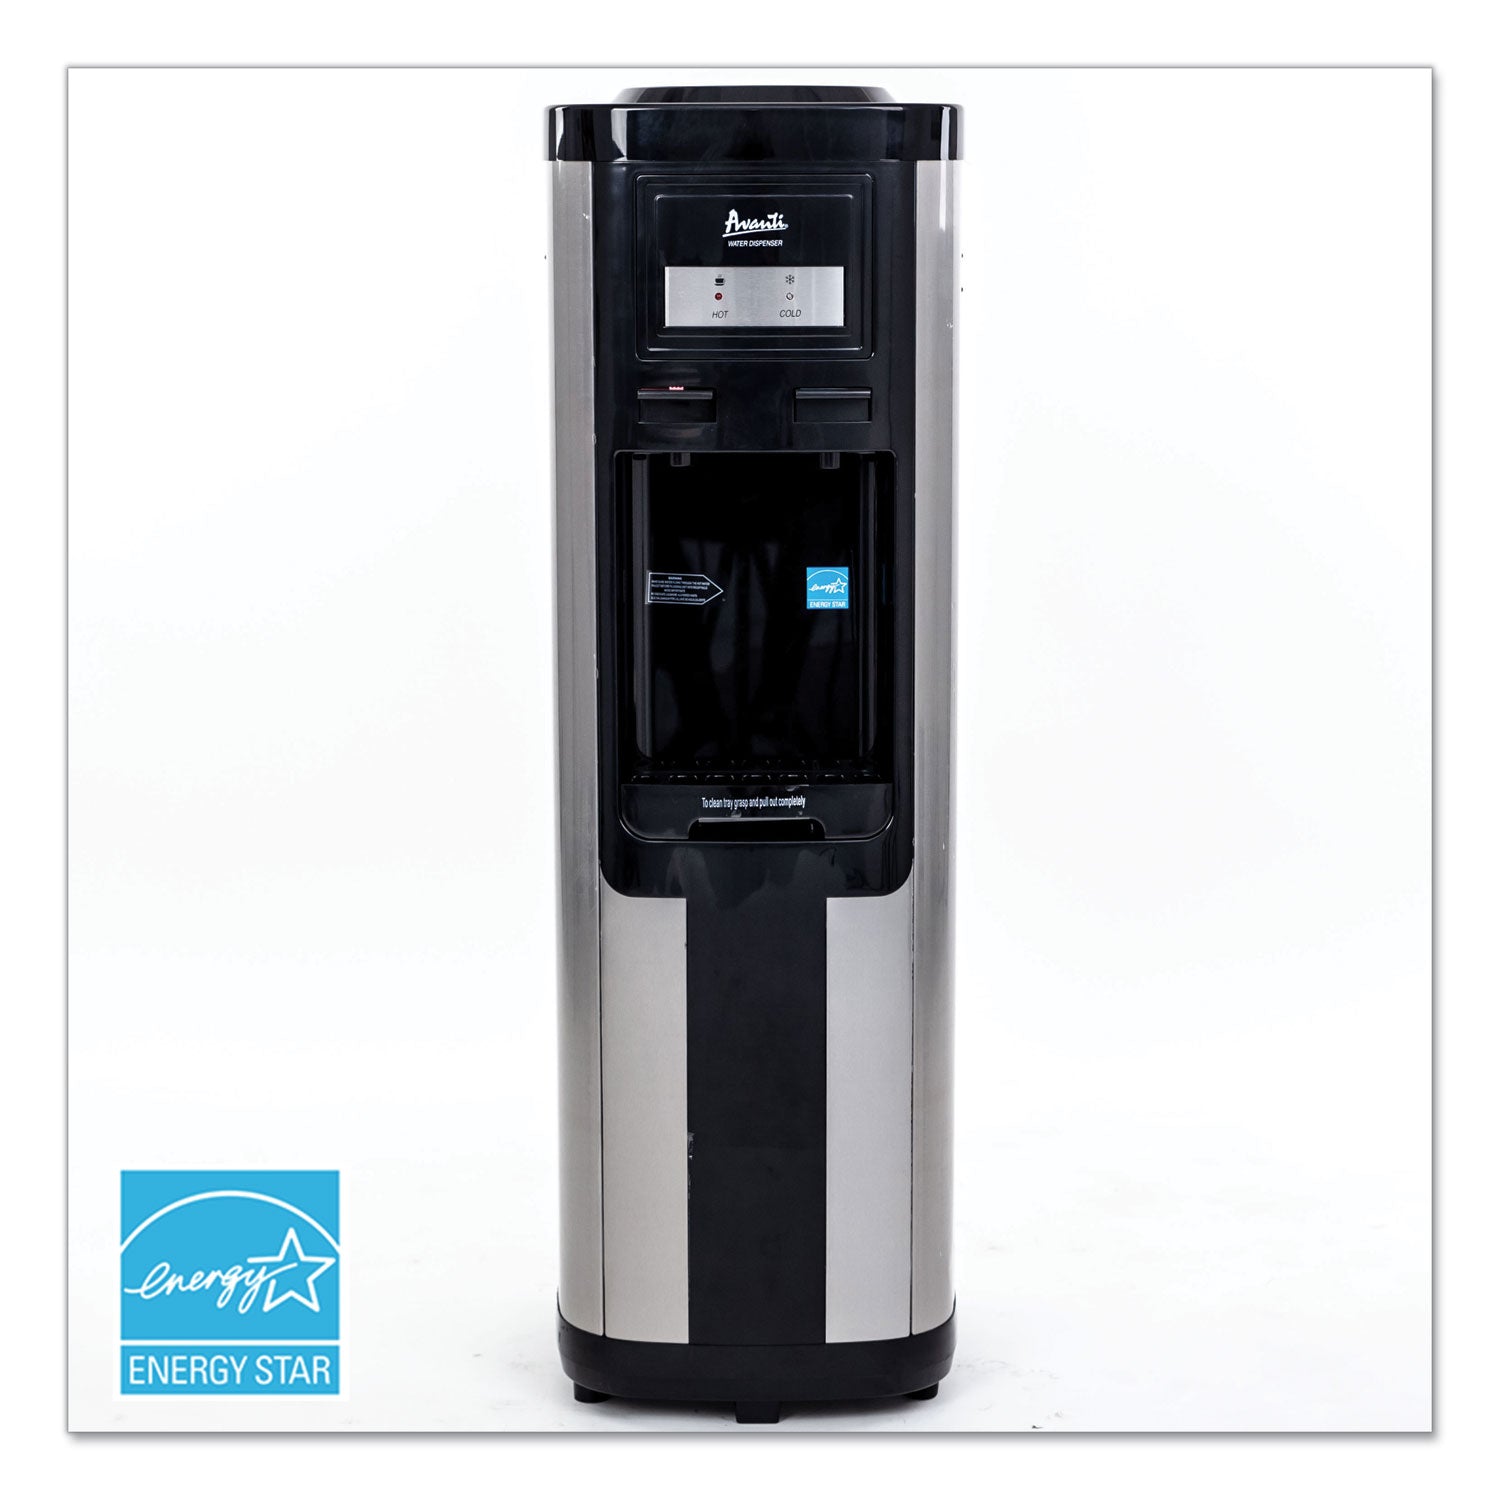 hot-and-cold-water-dispenser-3-5-gal-13-dia-x-3875-h-stainless-steel_avawdc760i3s - 1